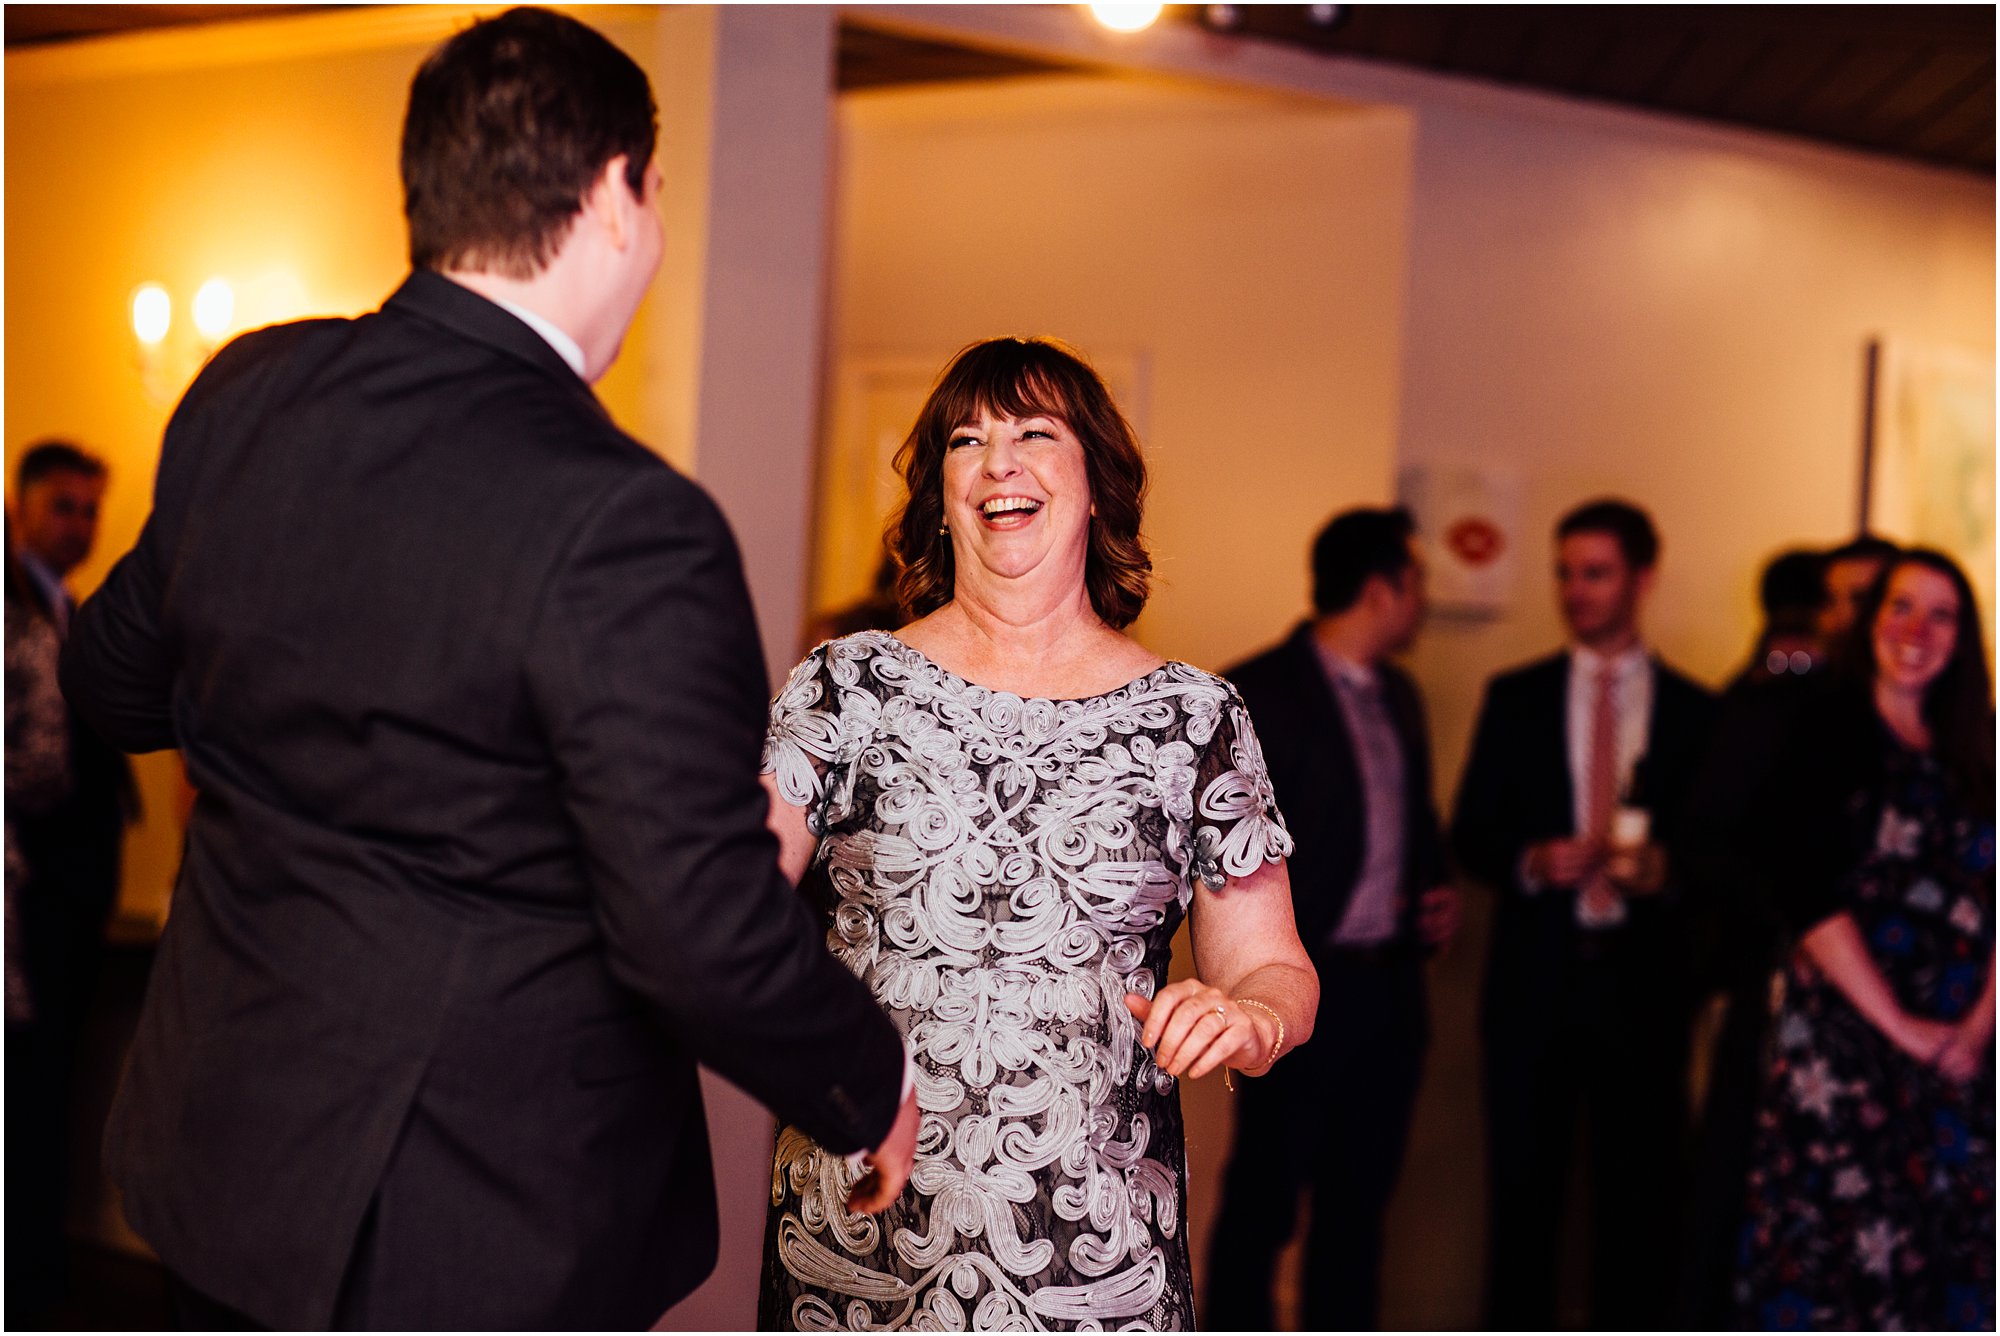 Mother laughing with her son during their dance together at his wedding